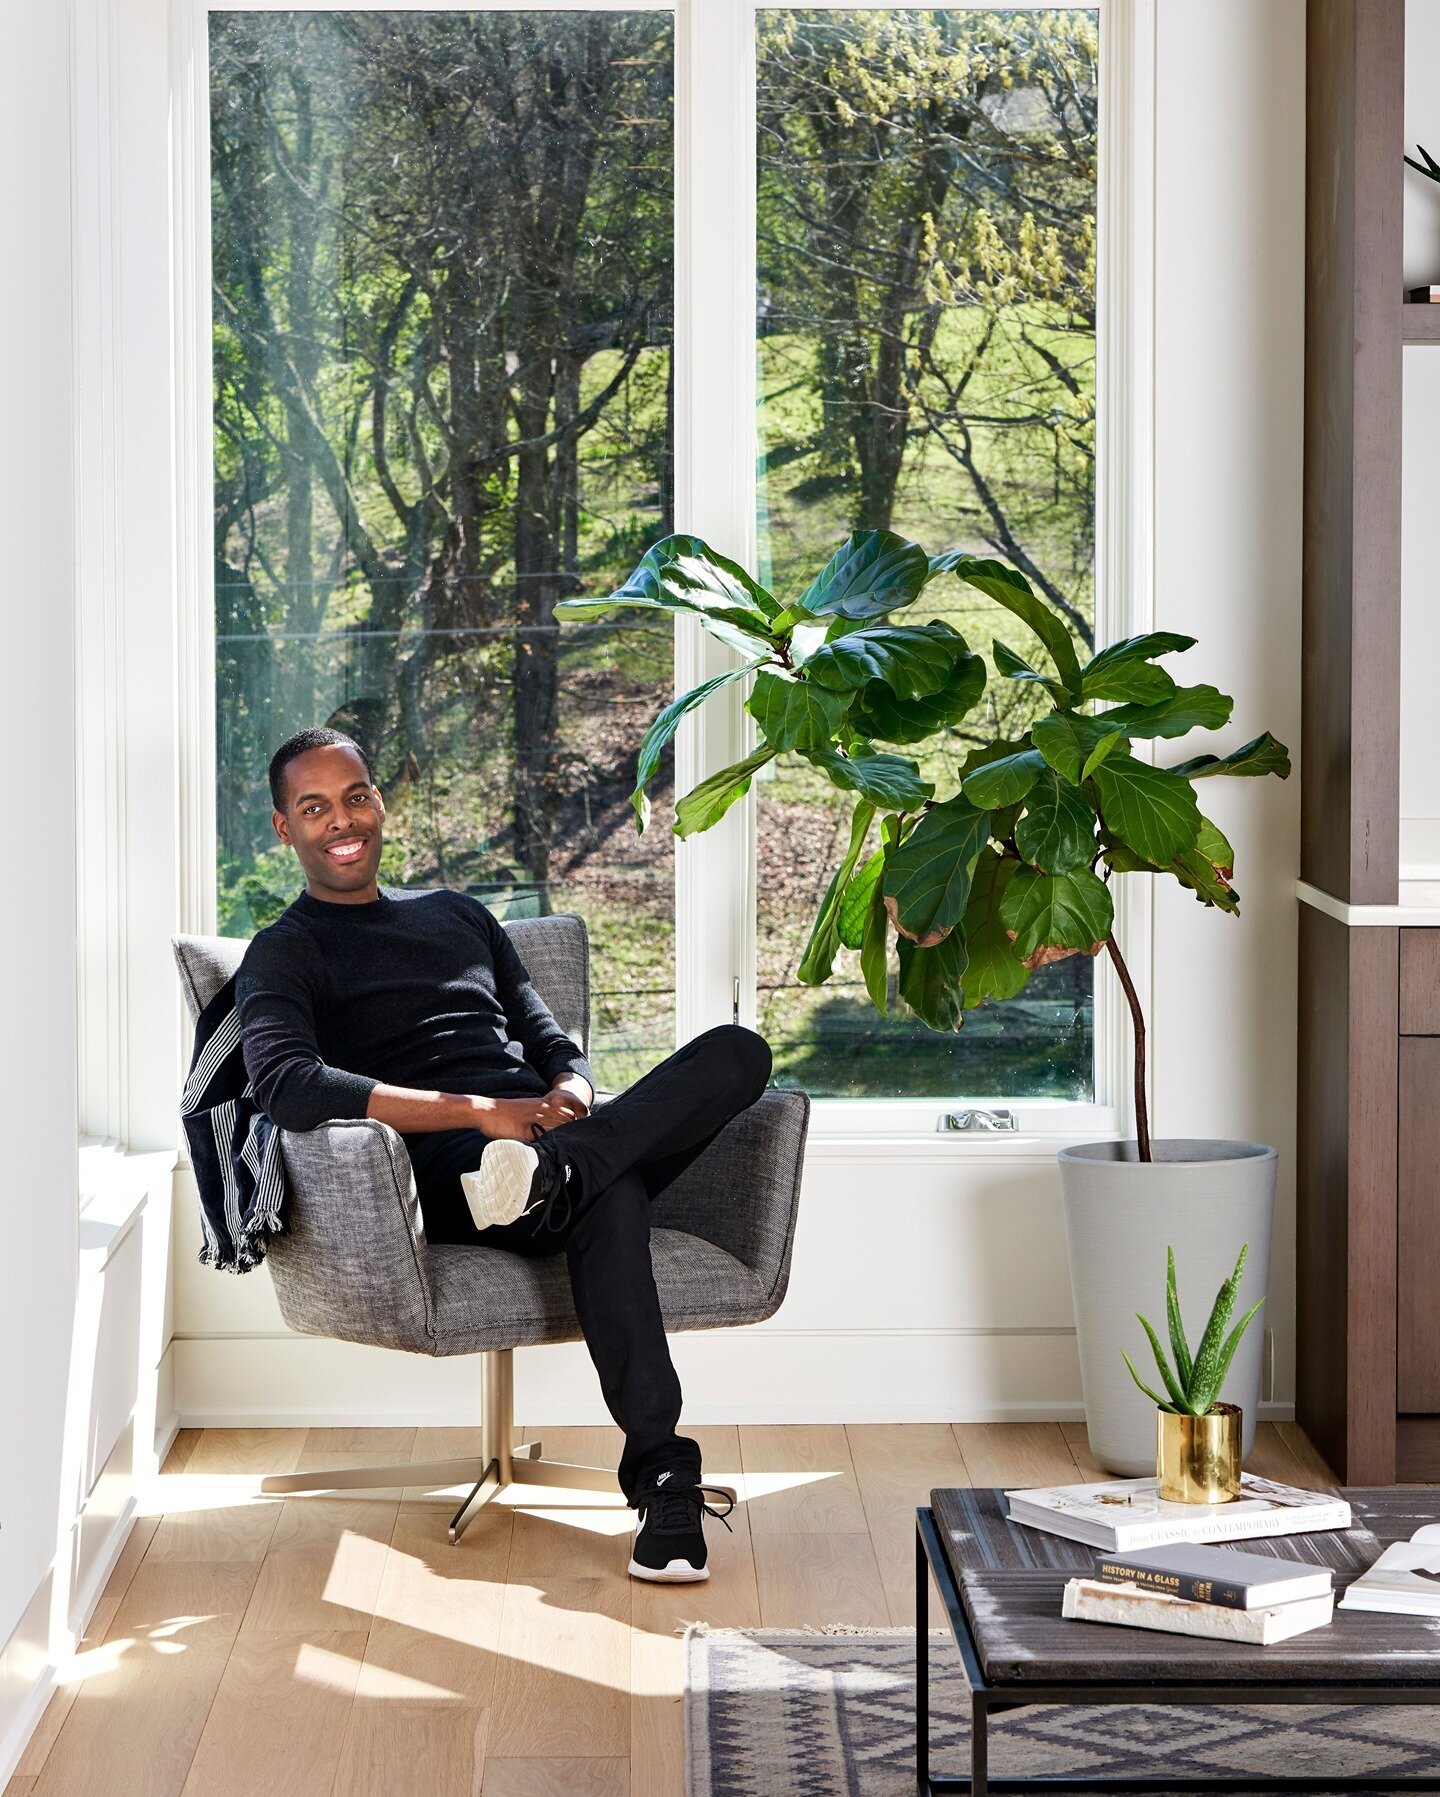 Connecting with clients near and far gives us a window on the world &mdash; but it's always nice when one of them joins us here at home! Chicago friends, please welcome #JCClient @amhadfreemaninteriors to the city. After nurturing his roots in Nashvi